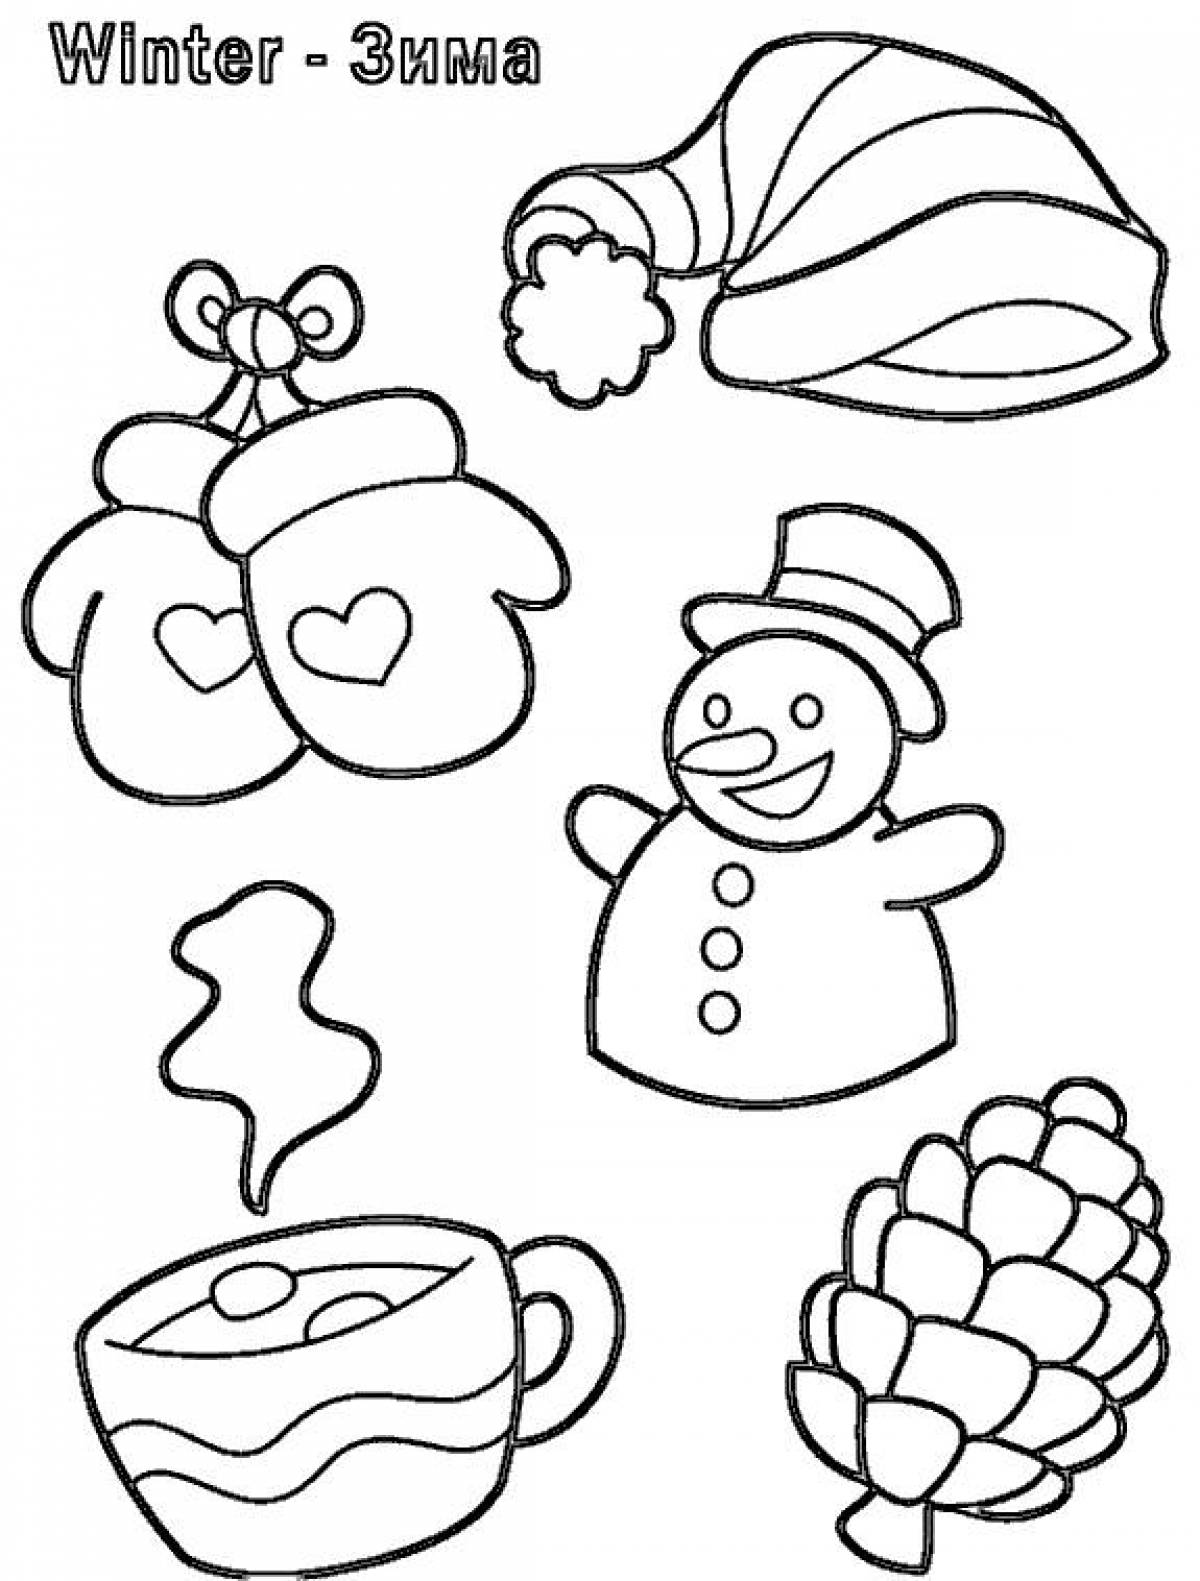 Hat and scarf coloring page